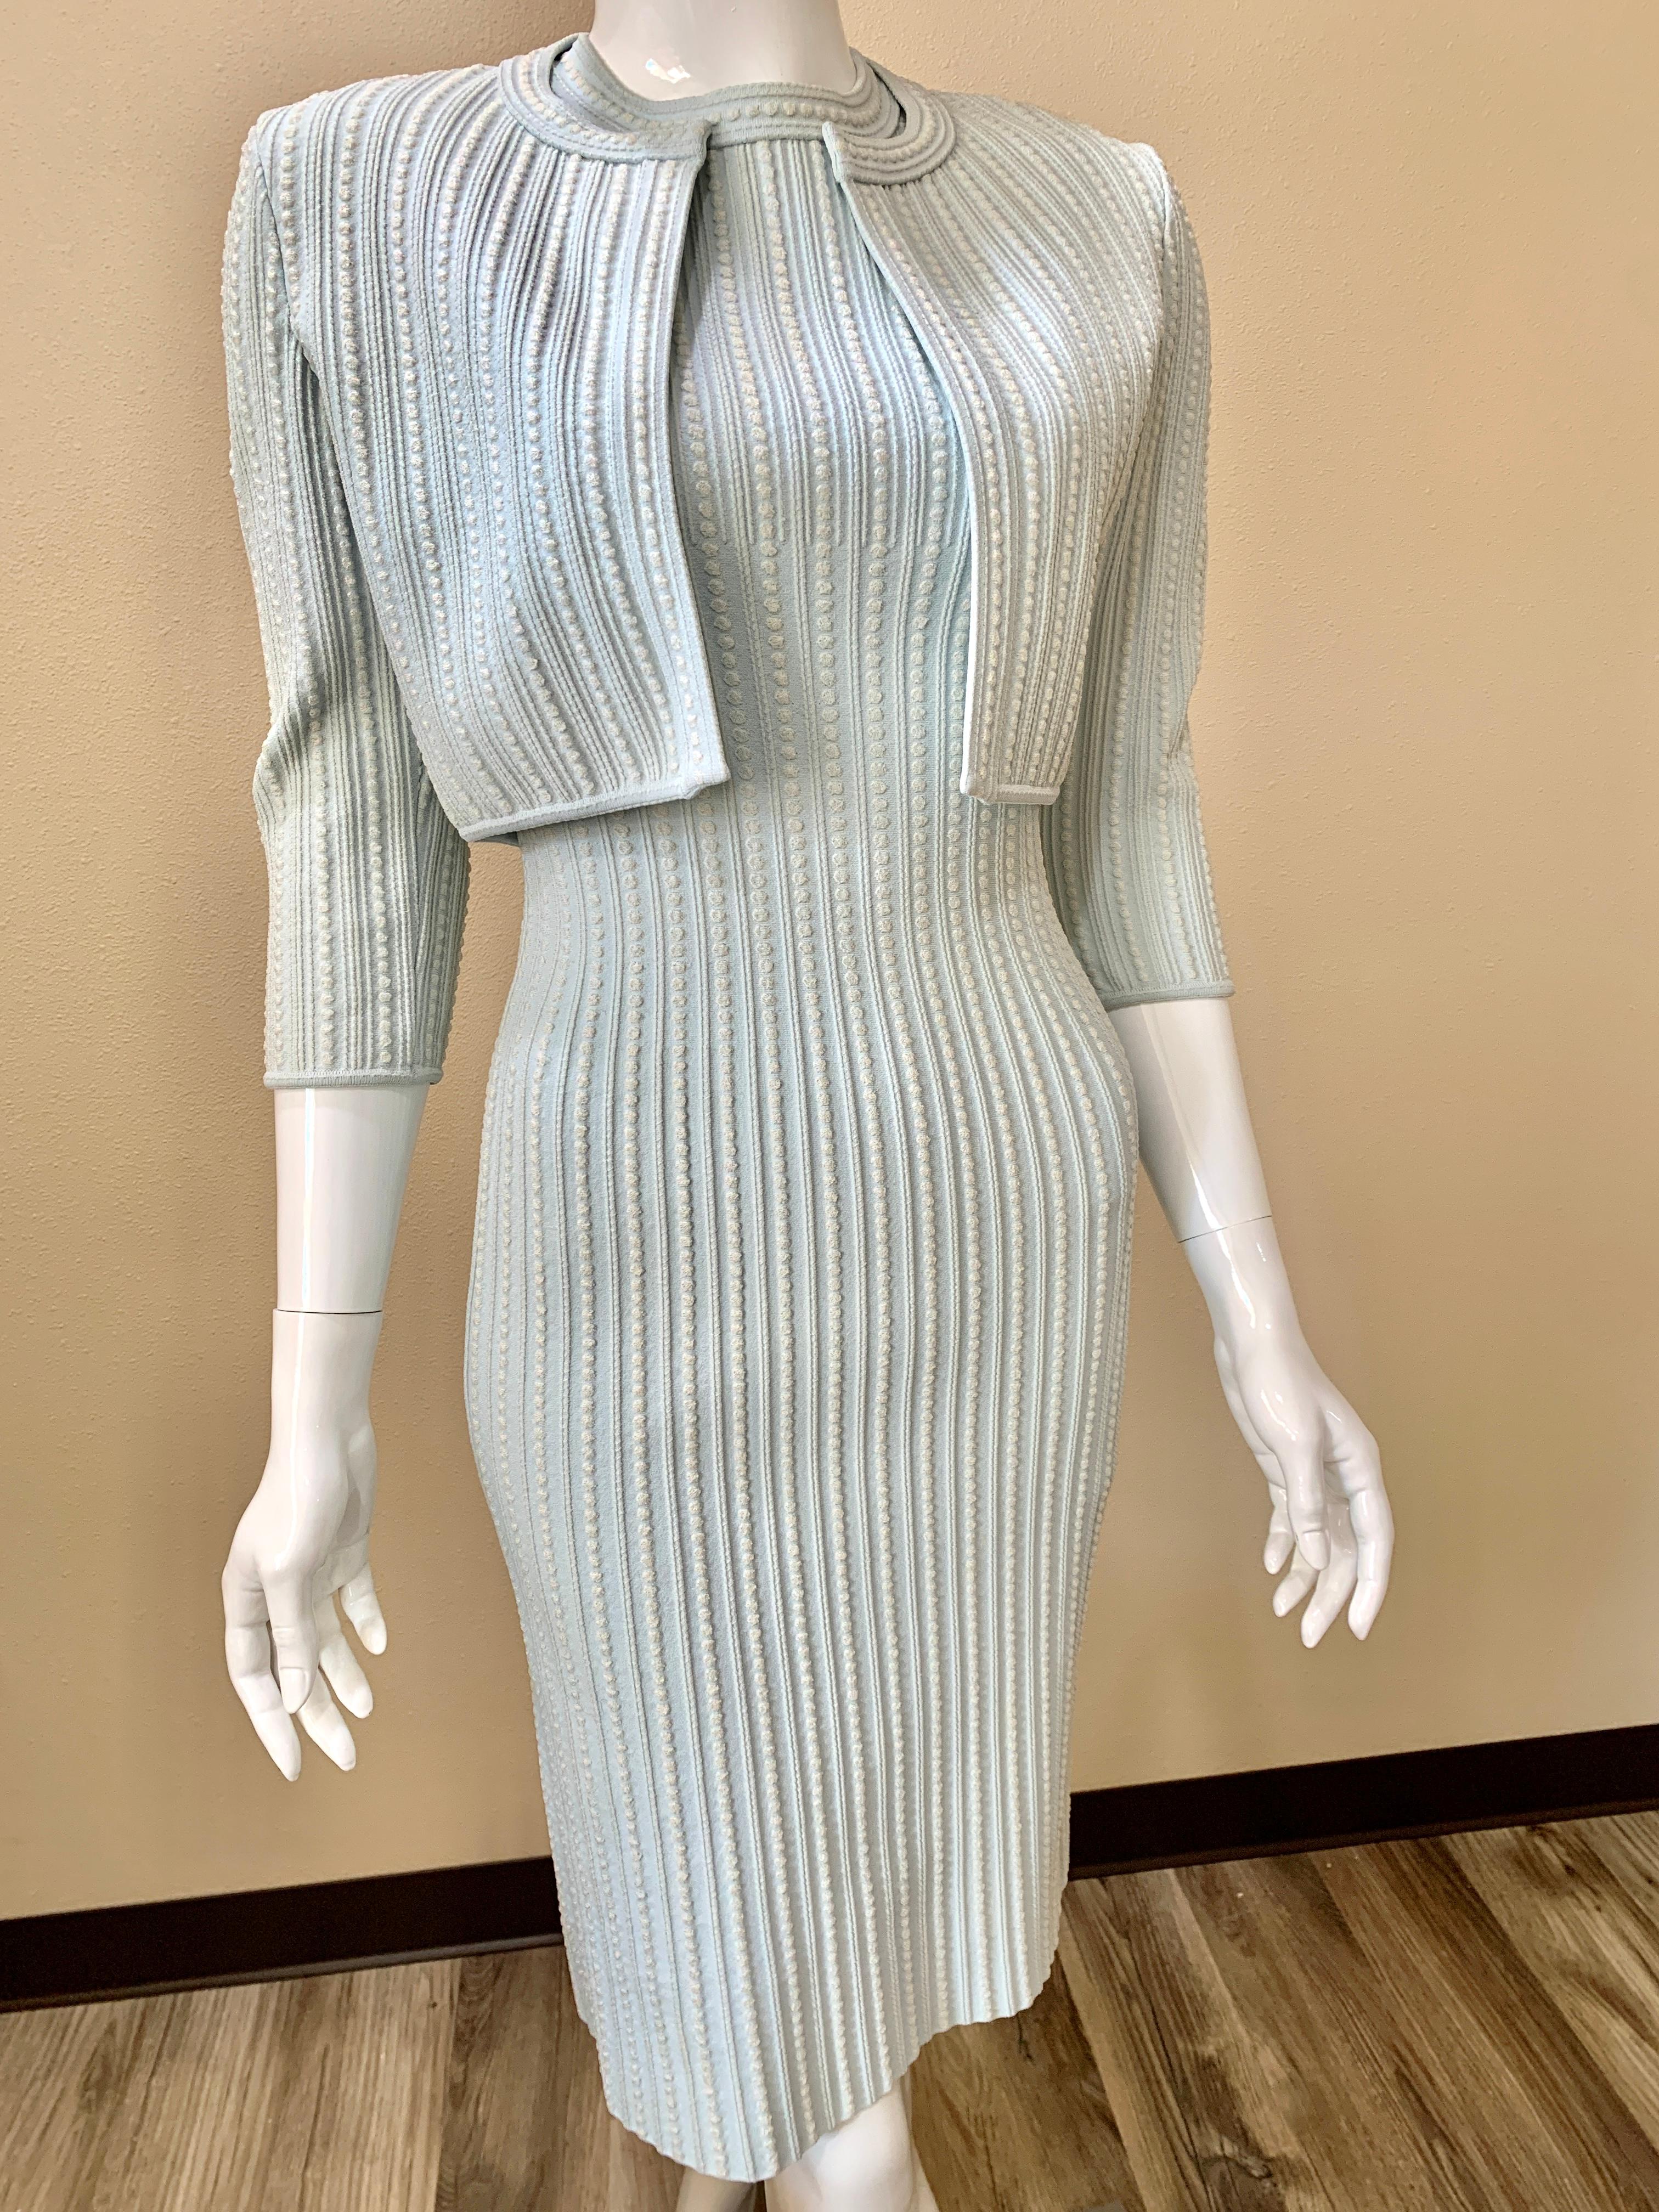 Collector's Item!!  - Alaia Paris sleeveless dress and matching cropped jacket in baby light blue. 

This is such a flattering and elegant silhouette. Depending on your height - this hits below the knee and arm length just above the elbow. 

Color: